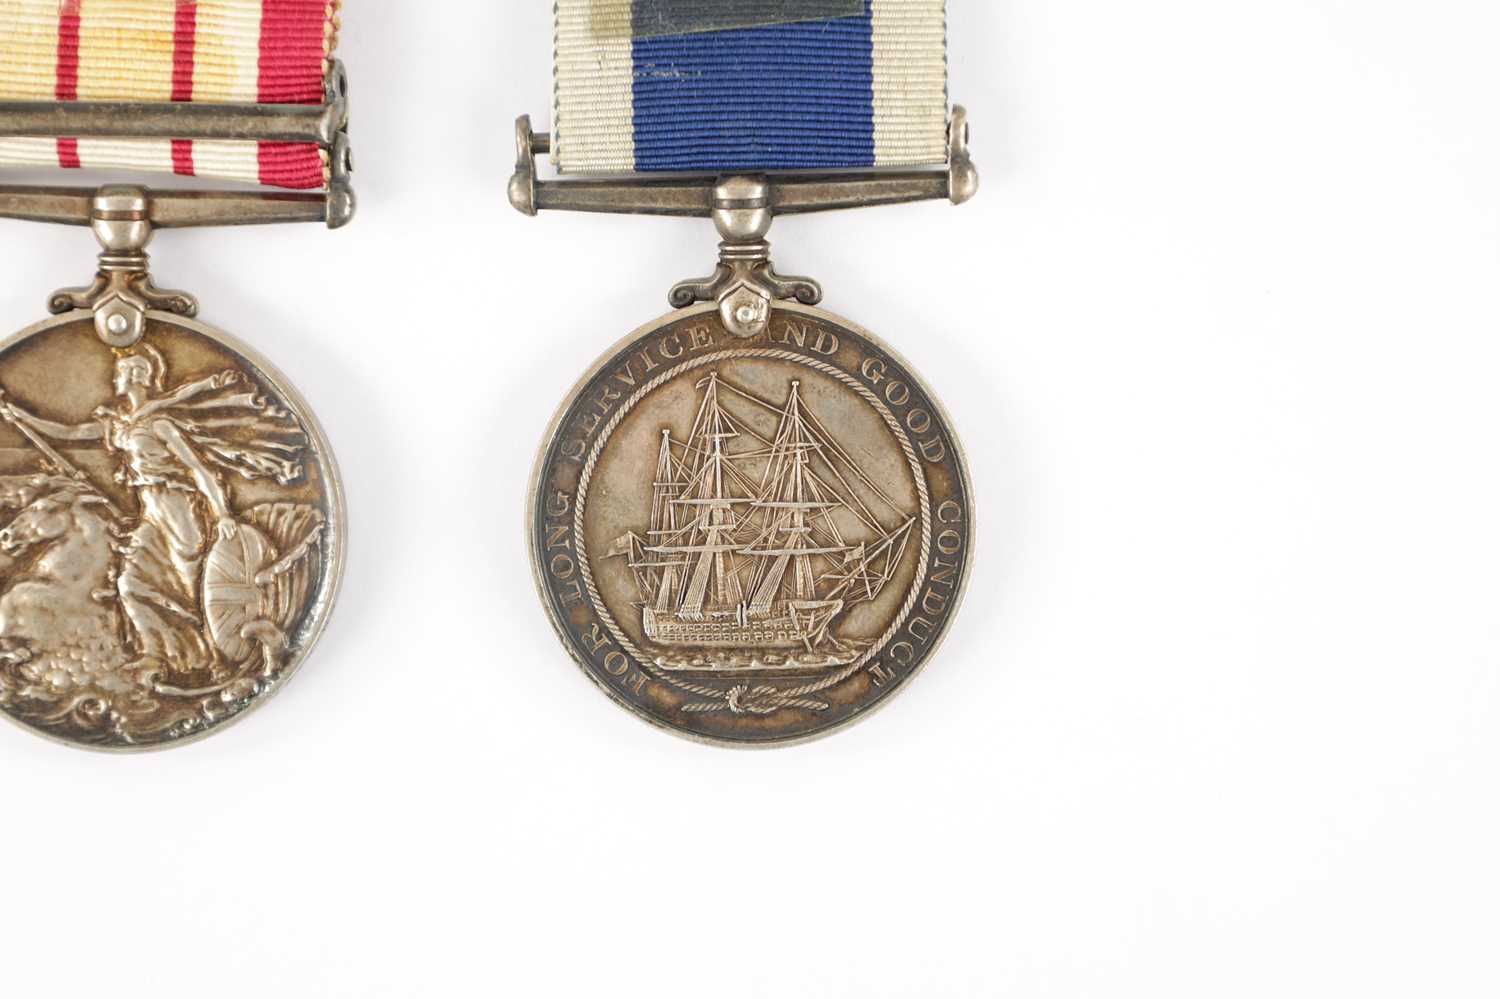 A GEORGE VI NAVAL GENERAL SERVICE MEDAL WITH PALESTINE 1936-1939 CLAPS AND ROYAL NAVY LONG SERVICE - Image 8 of 8